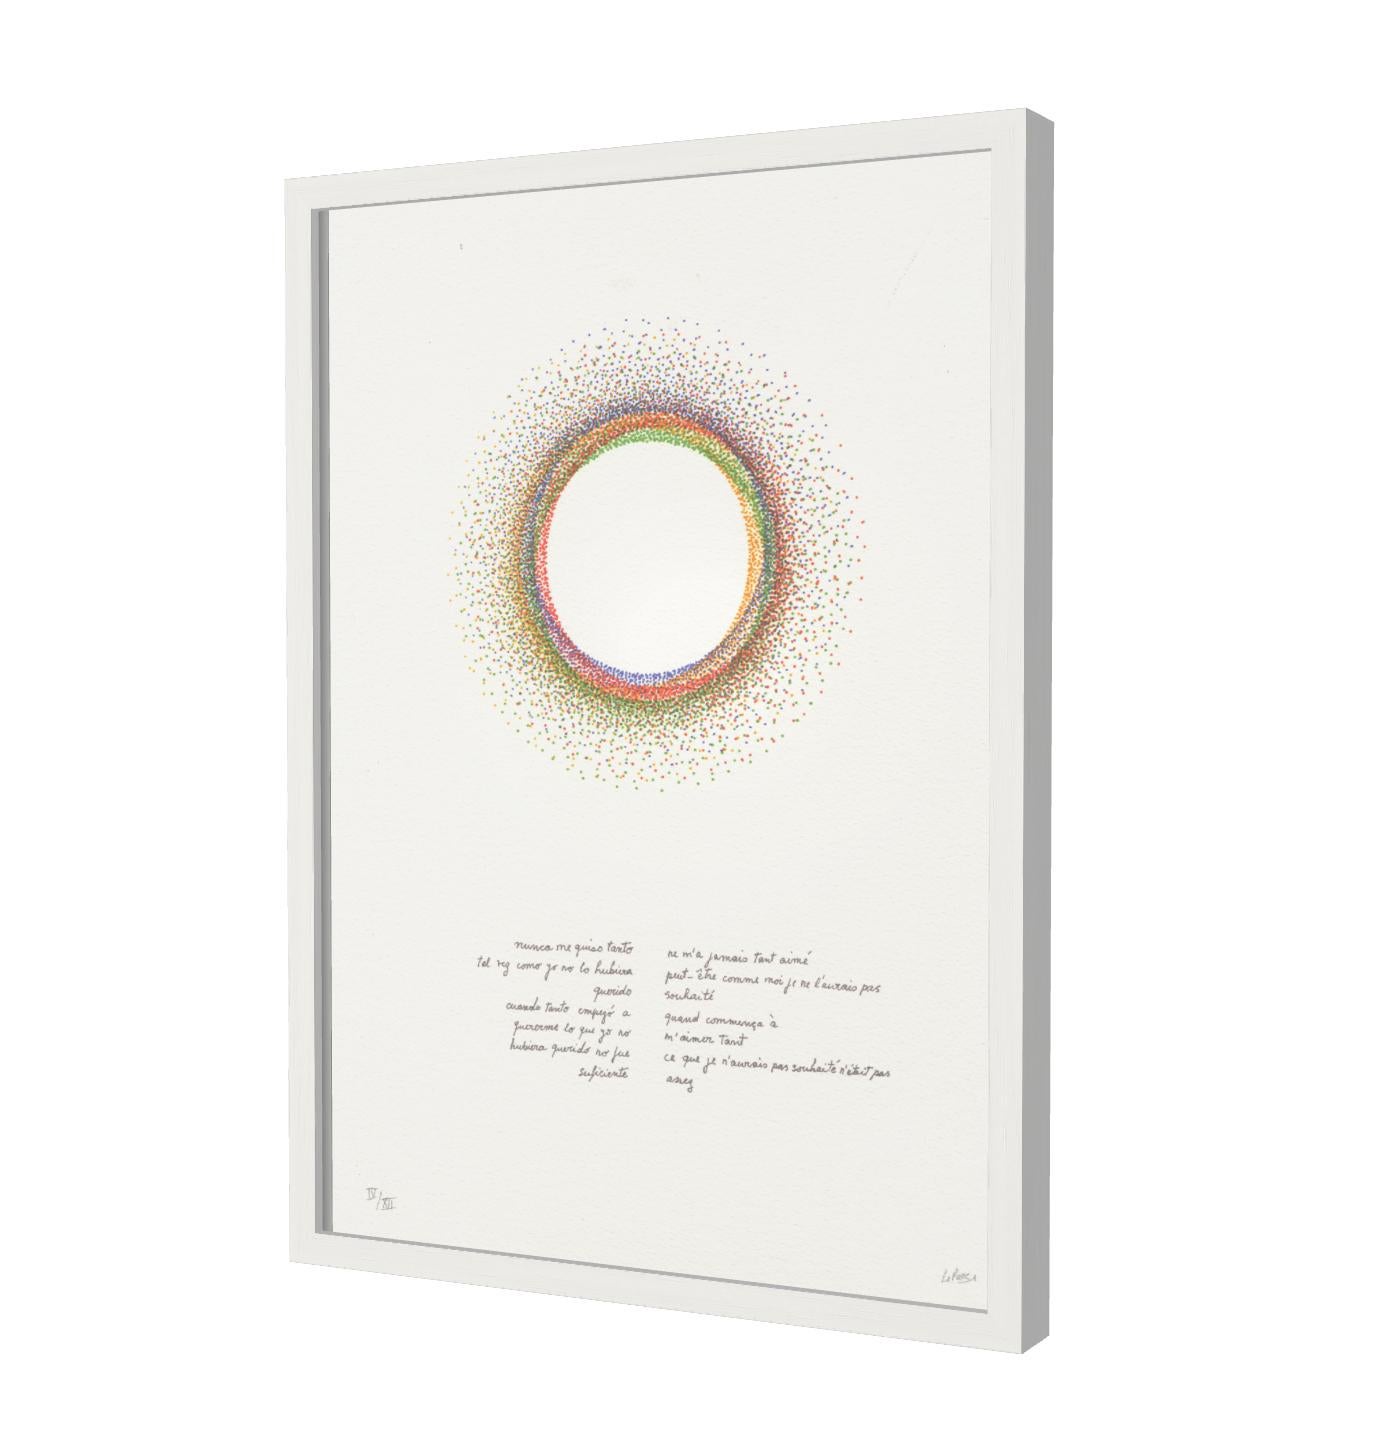 Signed and numbered art print by Julio Le Parc from the series 